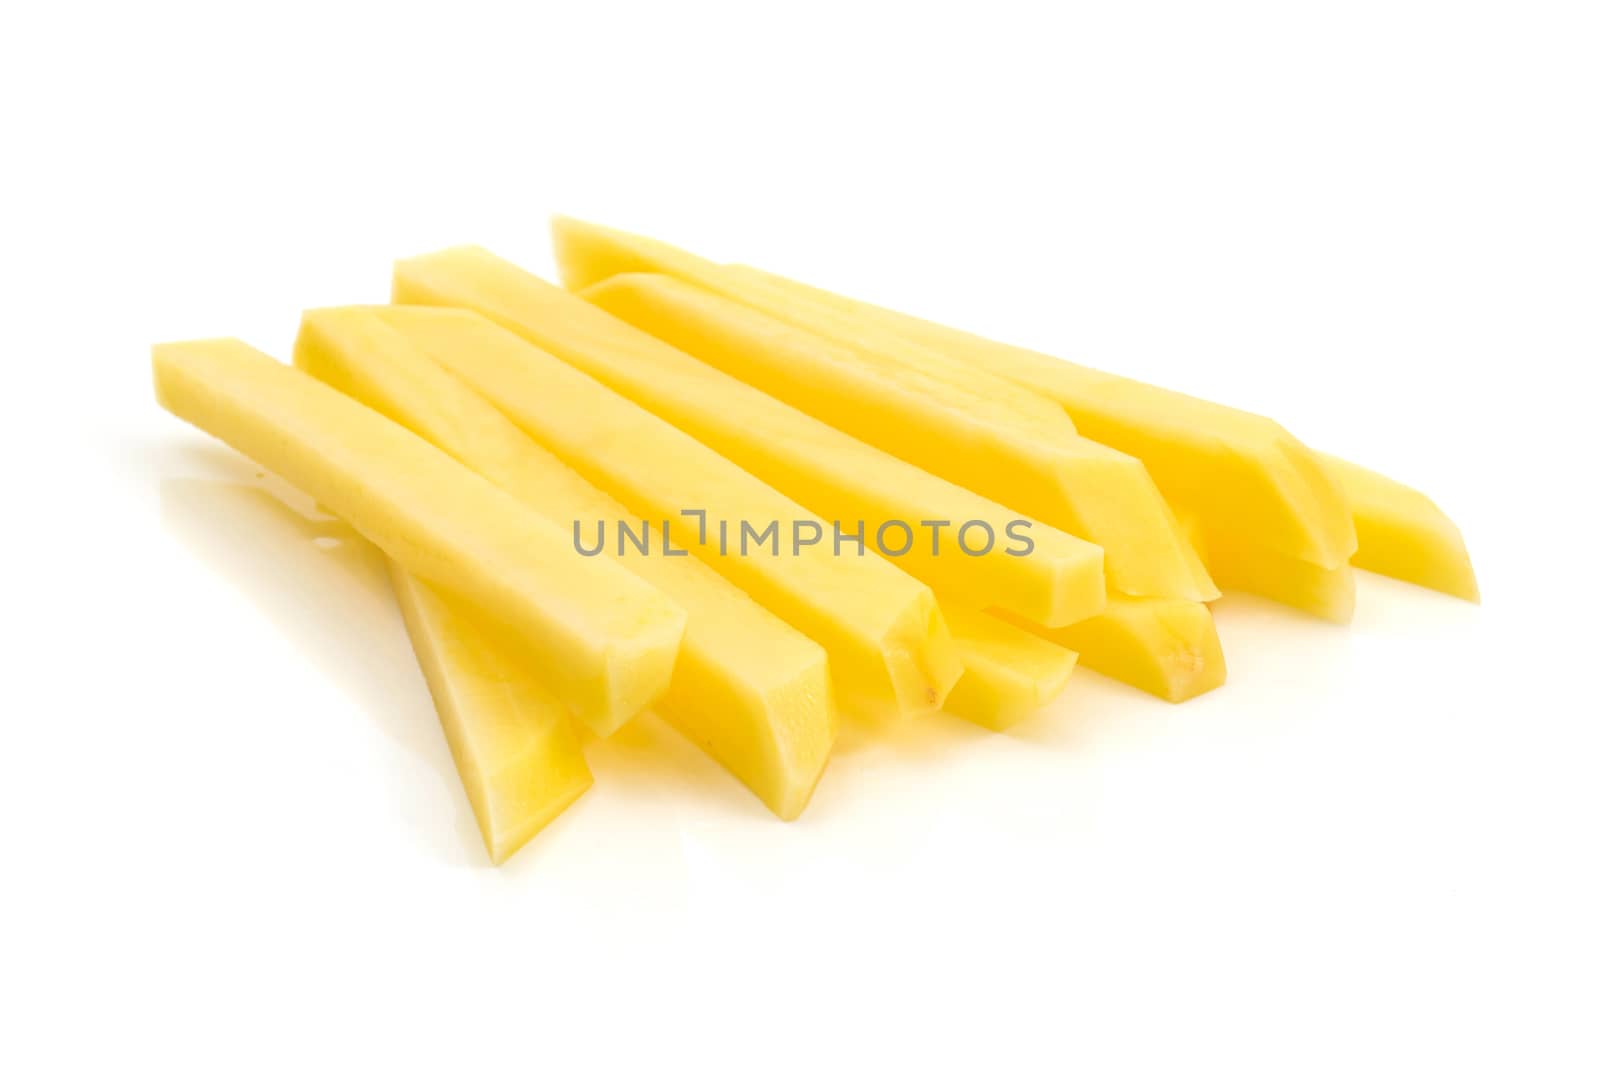 Potato raw and french fries on a white background